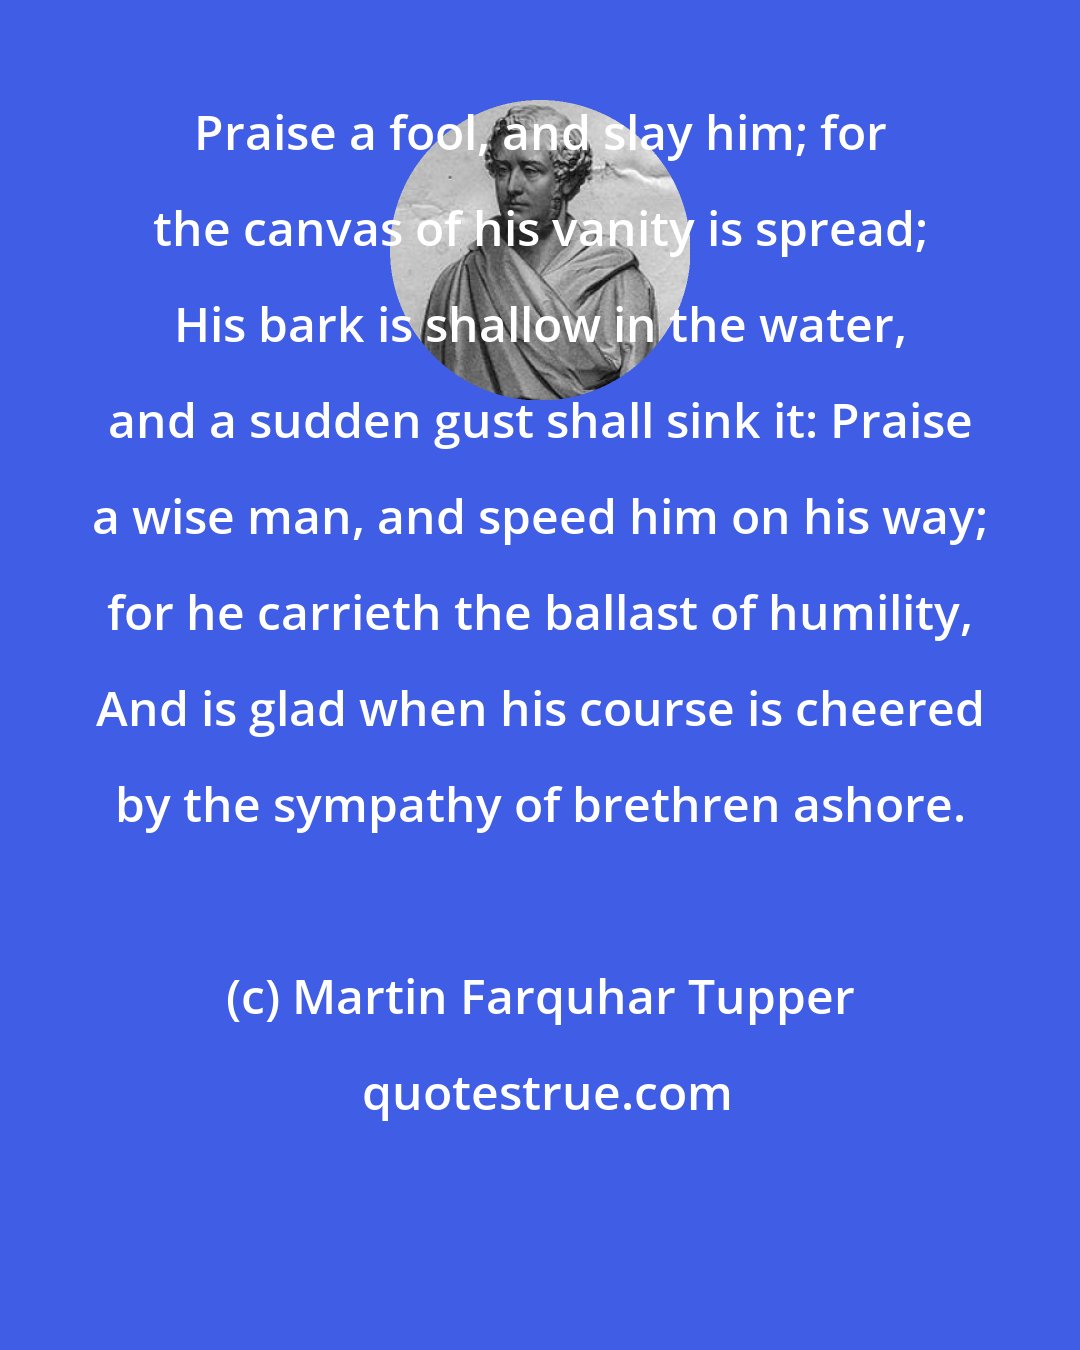 Martin Farquhar Tupper: Praise a fool, and slay him; for the canvas of his vanity is spread; His bark is shallow in the water, and a sudden gust shall sink it: Praise a wise man, and speed him on his way; for he carrieth the ballast of humility, And is glad when his course is cheered by the sympathy of brethren ashore.